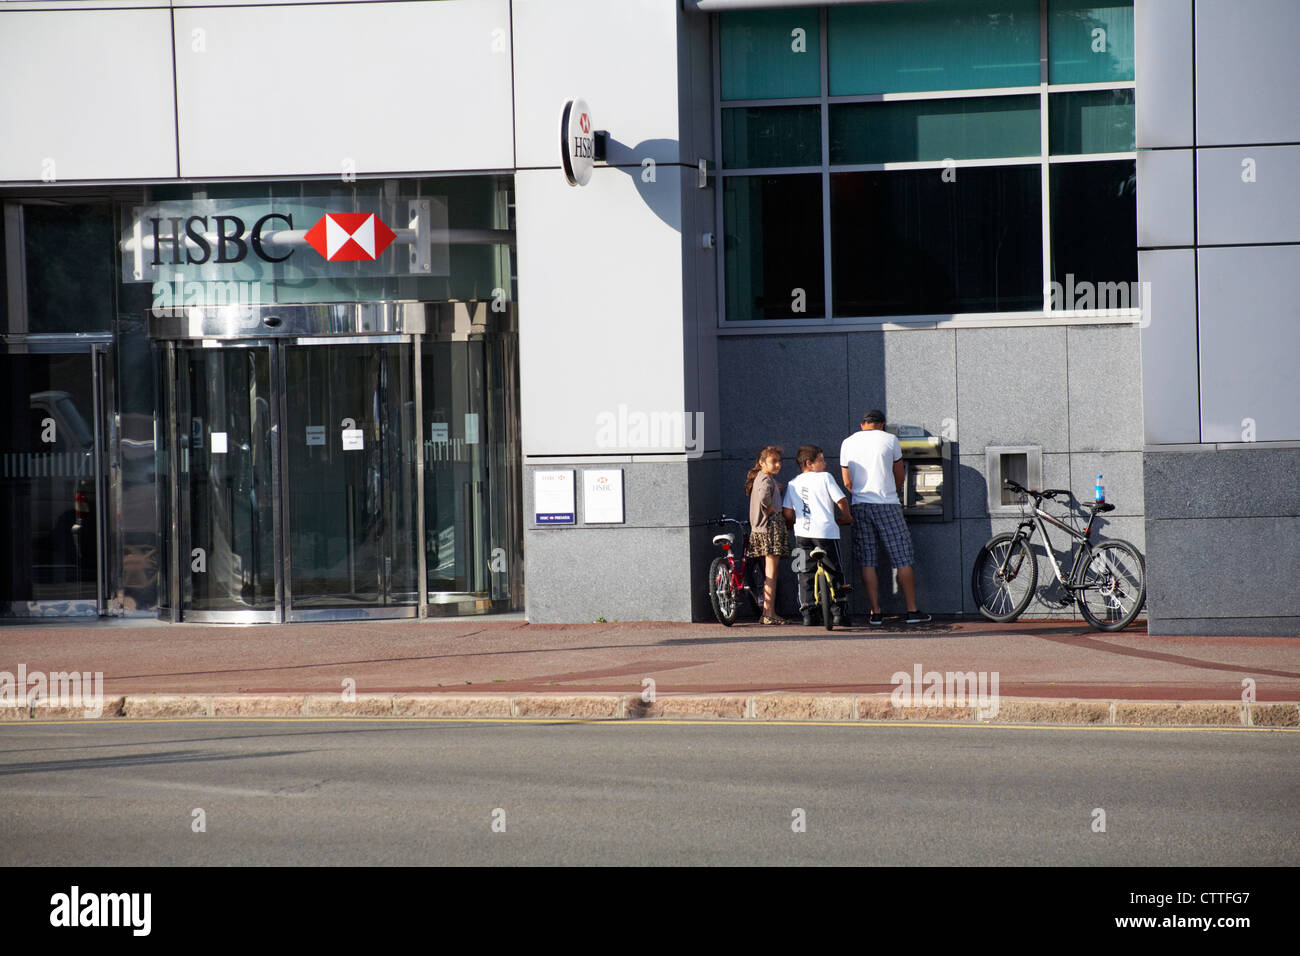 Family with pushbikes using cash machine ATM at HSBC bank in St Helier, Jersey, Channel Islands, UK in July Stock Photo